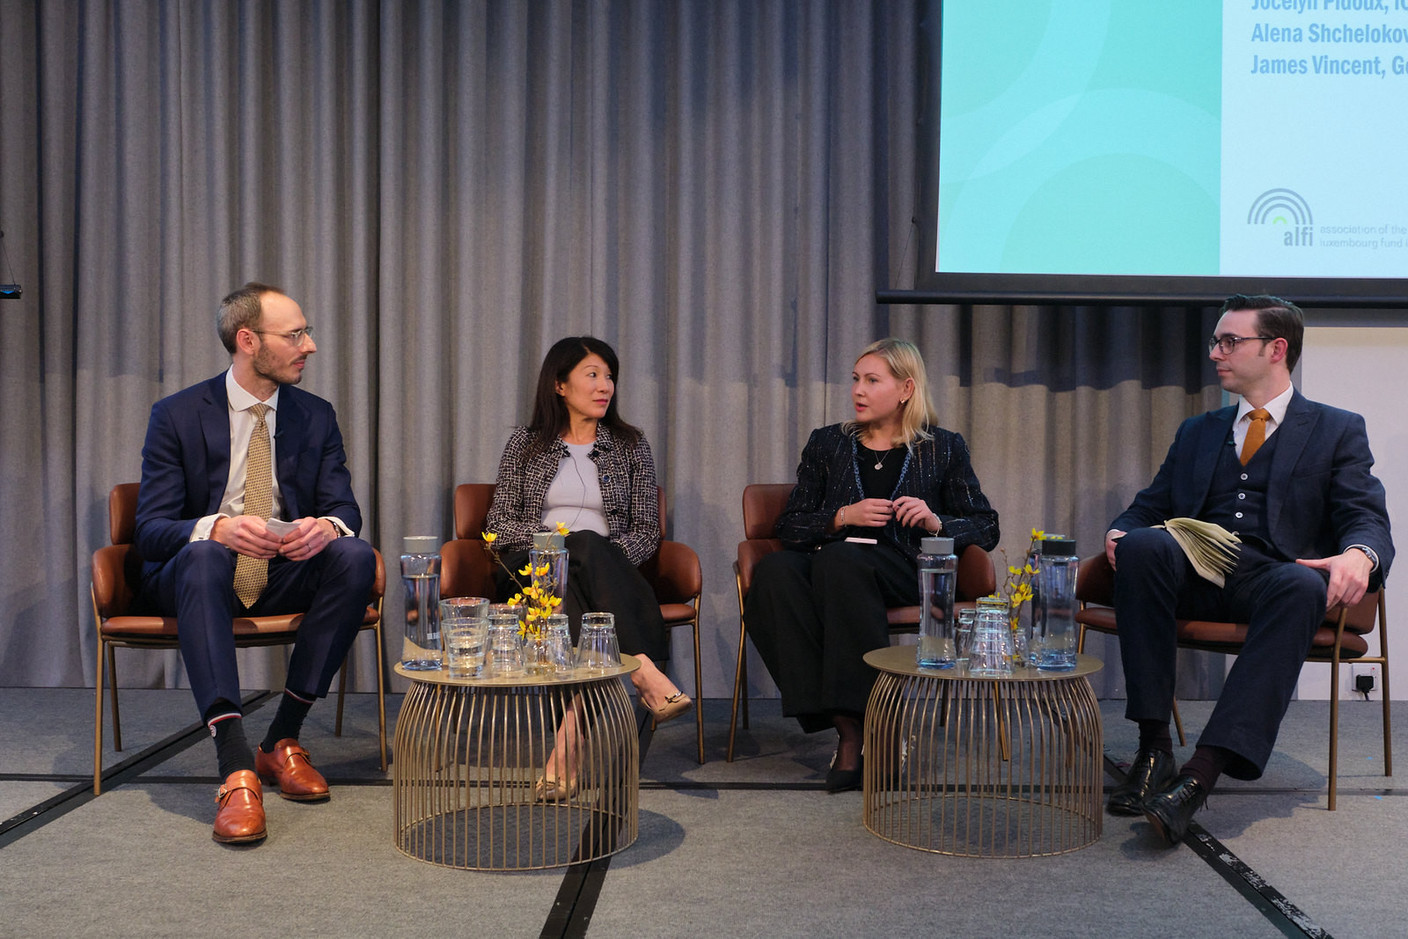 Raoul Heinen, partner at Linklaters (on left), Jocelyn Pidoux, managing director, product development & structuring at Icapital (second from left), on “The democratisation of private assets: is the phenomenon here to stay?” panel during Alfi’s London conference, 19 October 2023 Photo: ALFI